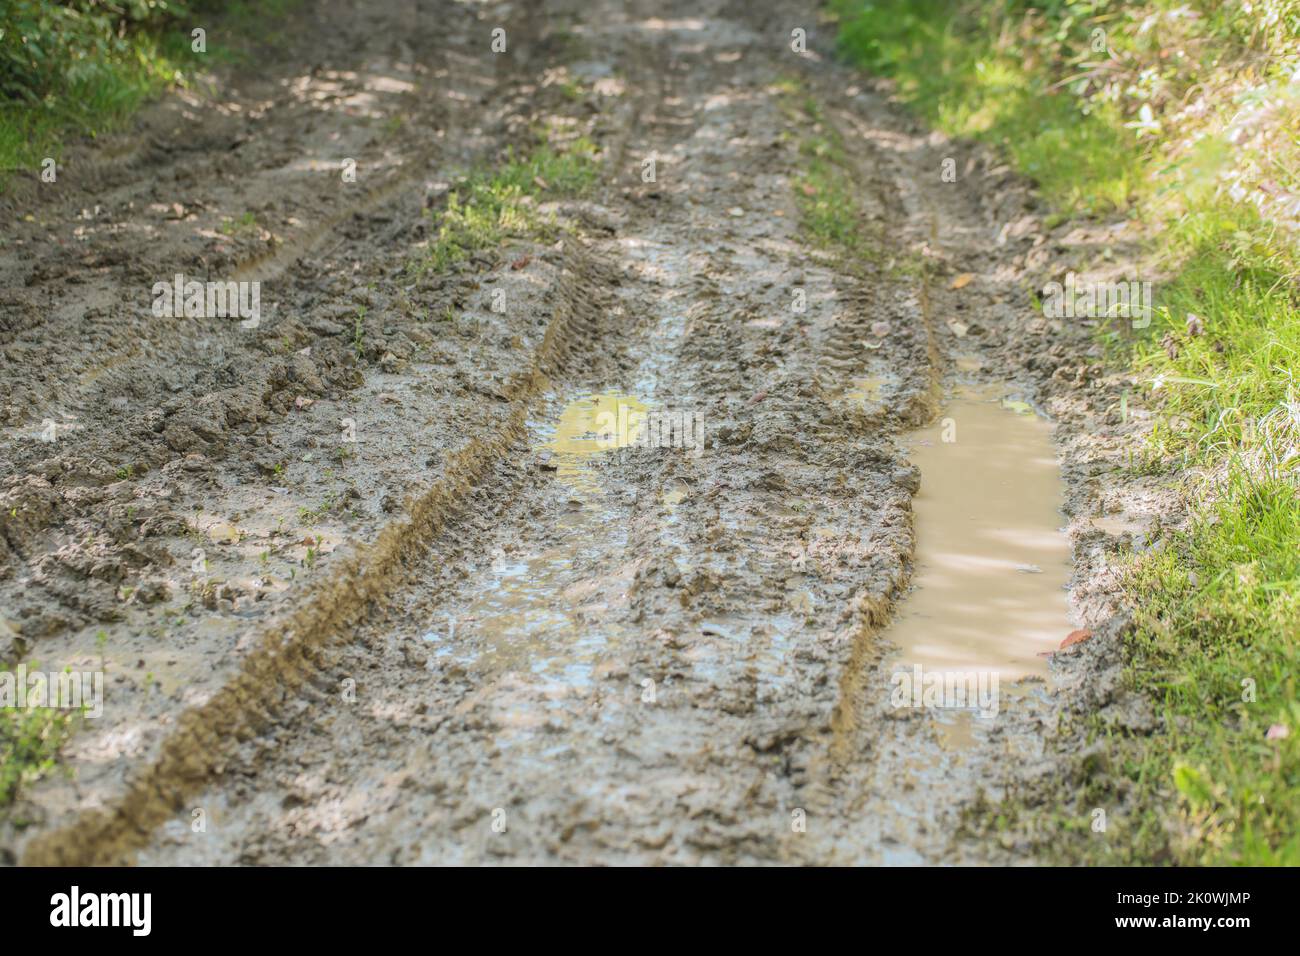 Muddy puddle on dirty road after rainy day. Splash in the rut from the wheel. Muddy weather. Countryside. Stock Photo